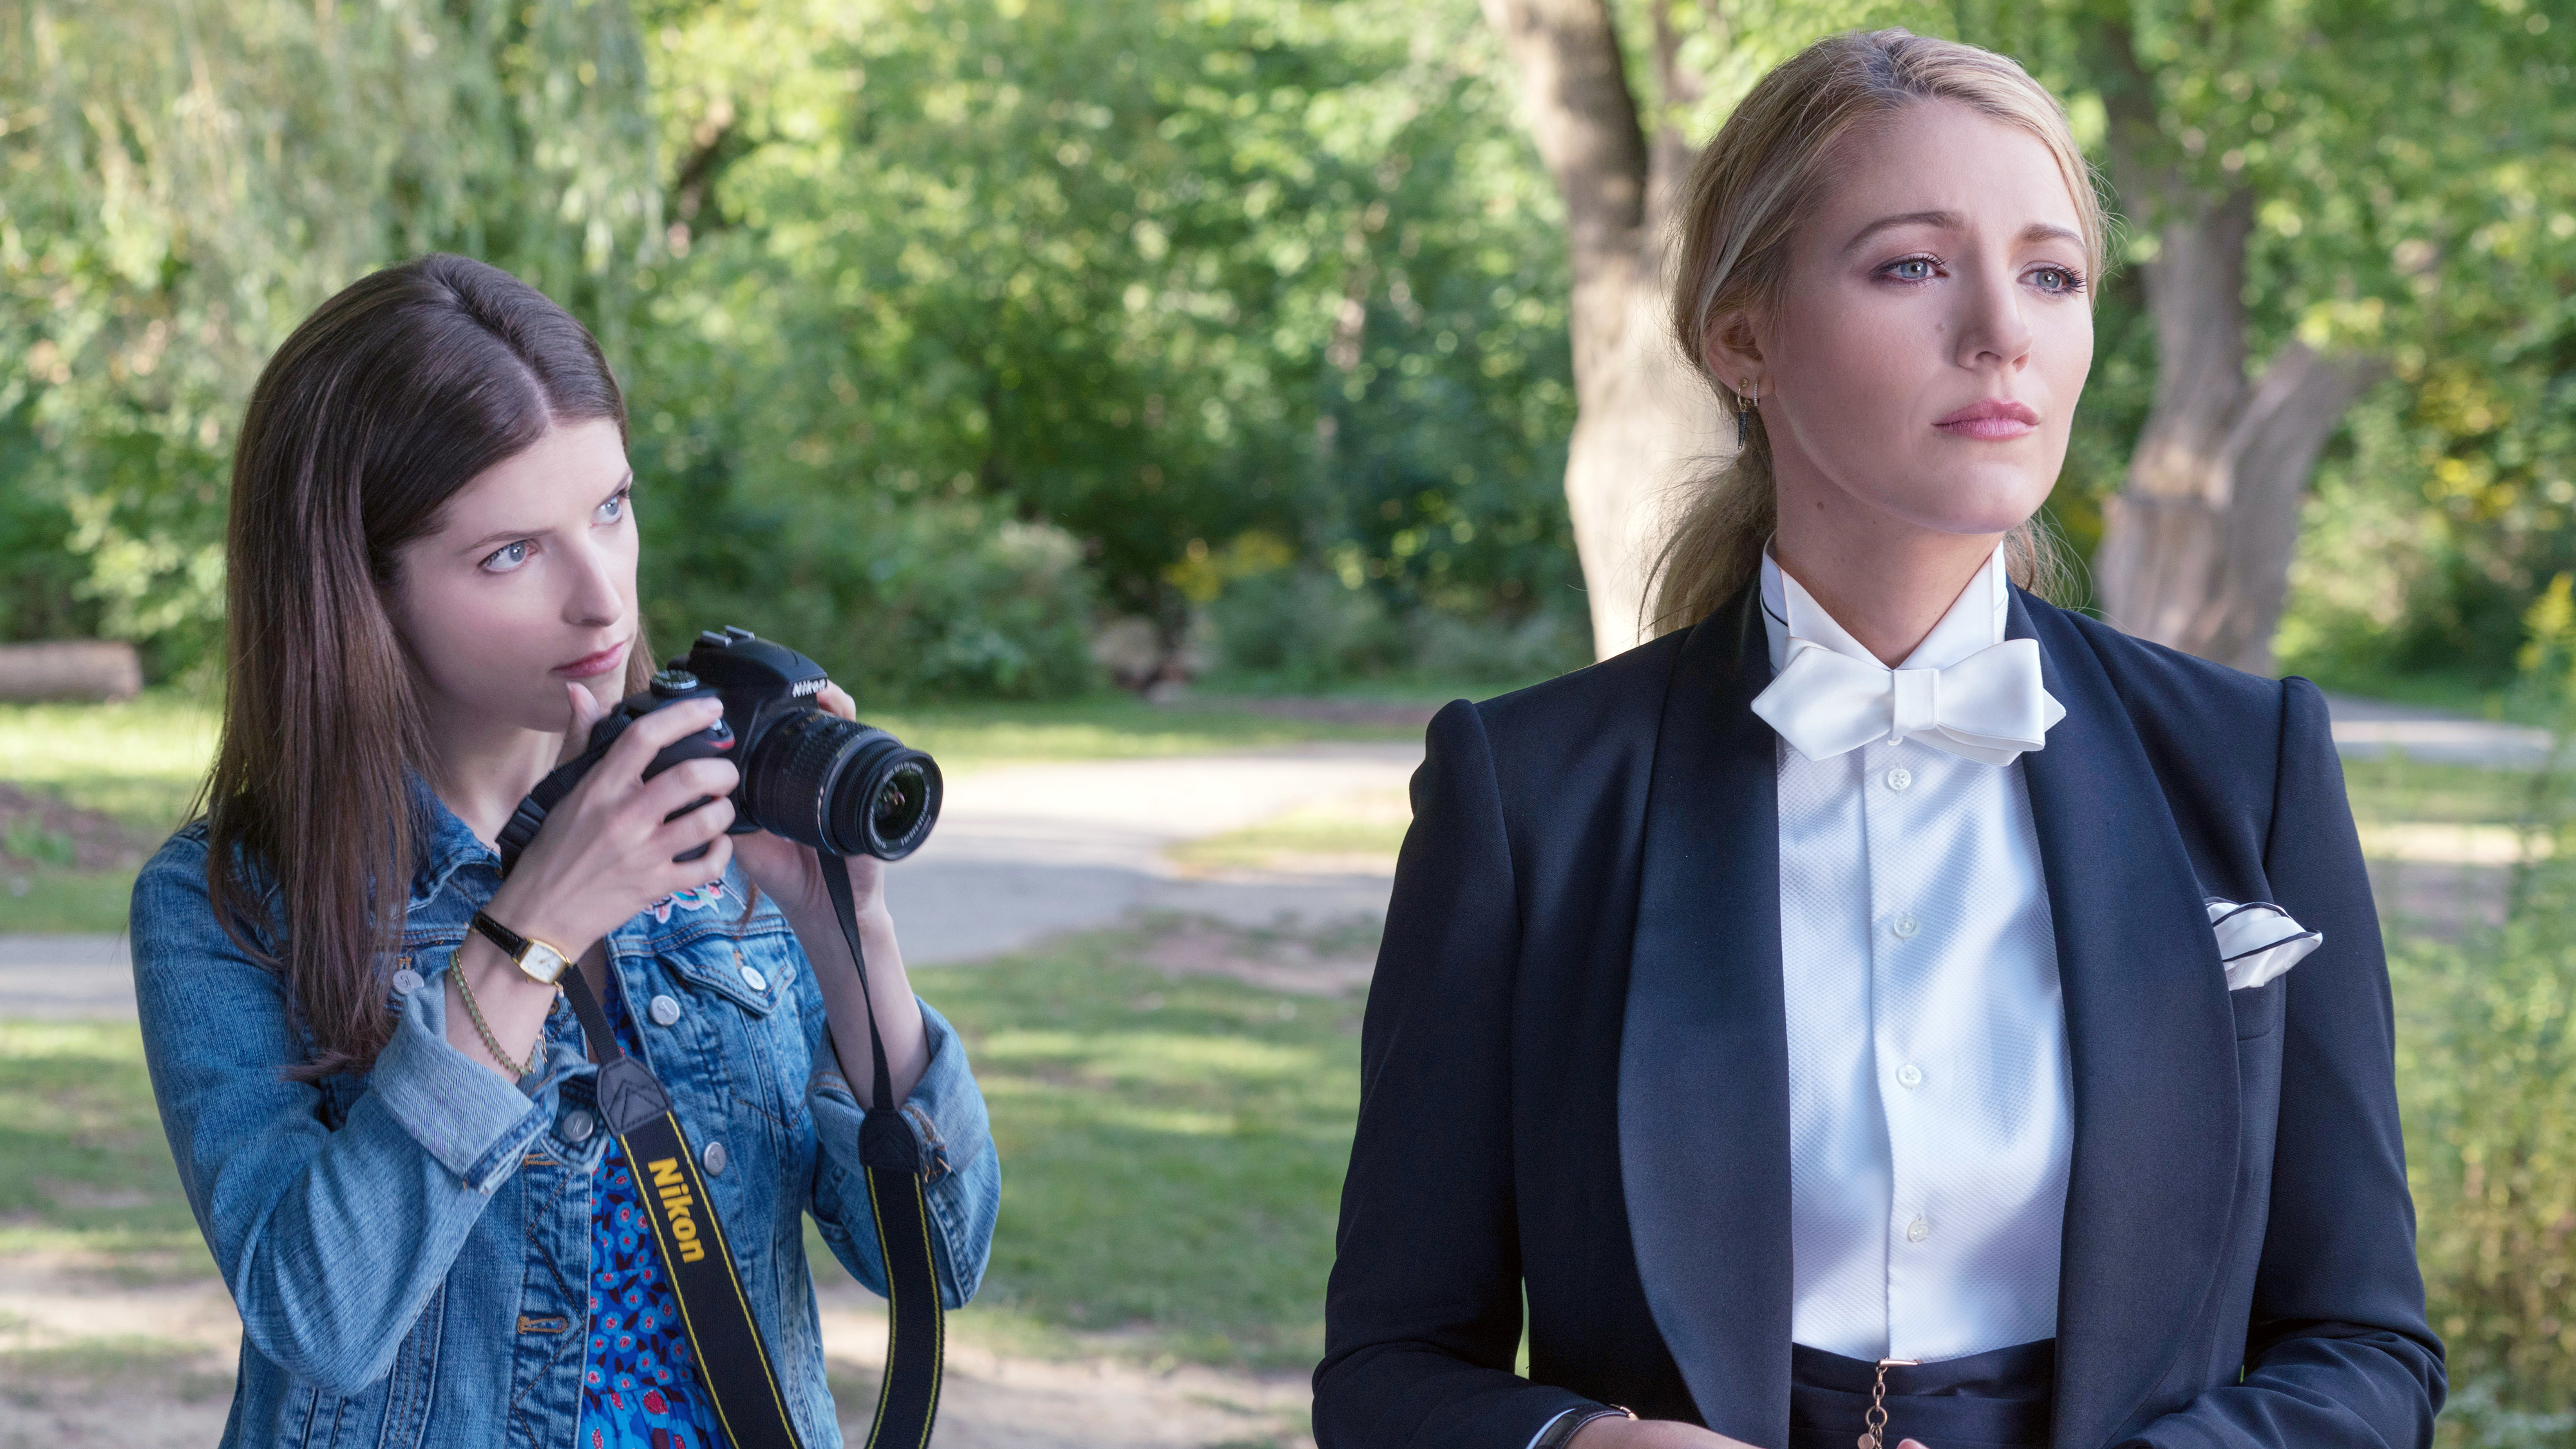 Anna with a camera looking intrigued and Blake in business attire looking pensive